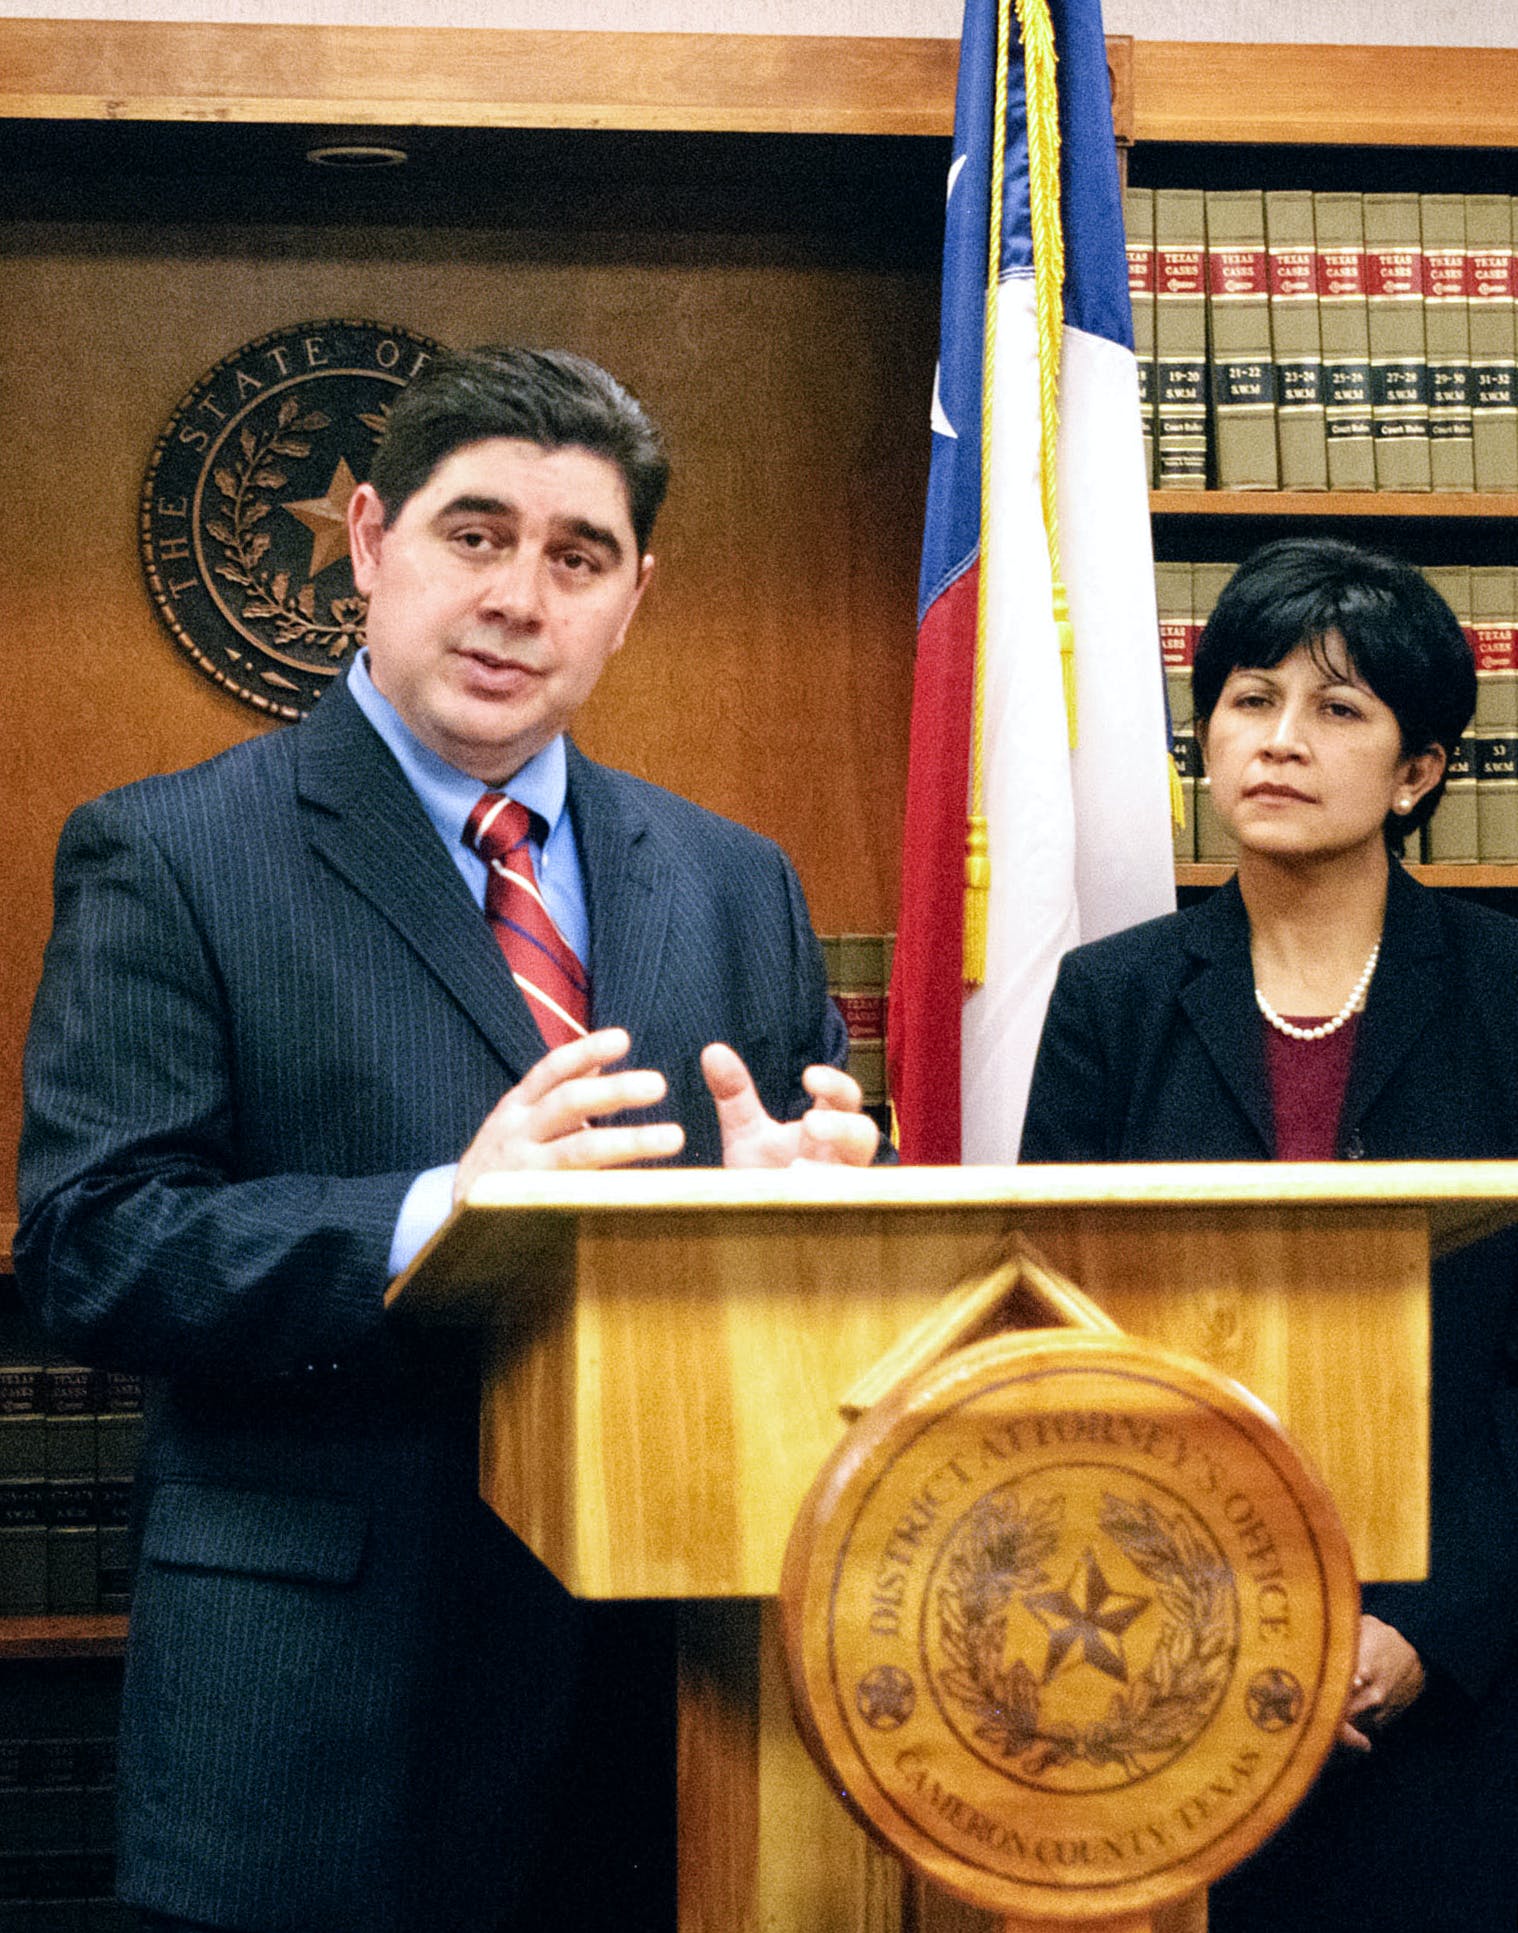 District Attorney Armando Villalobos, left, speaks at a press conference Thursday July 10, 2008 after Melissa Elizabeth Lucio was sentenced to death at the 138th state District Court in Brownsville, Texas. Lucio was found guilty of beating to death her 2-½ year old daughter on Feb. 17, 2007. (AP Photo/Valley Morning Star, Theresa Najera)